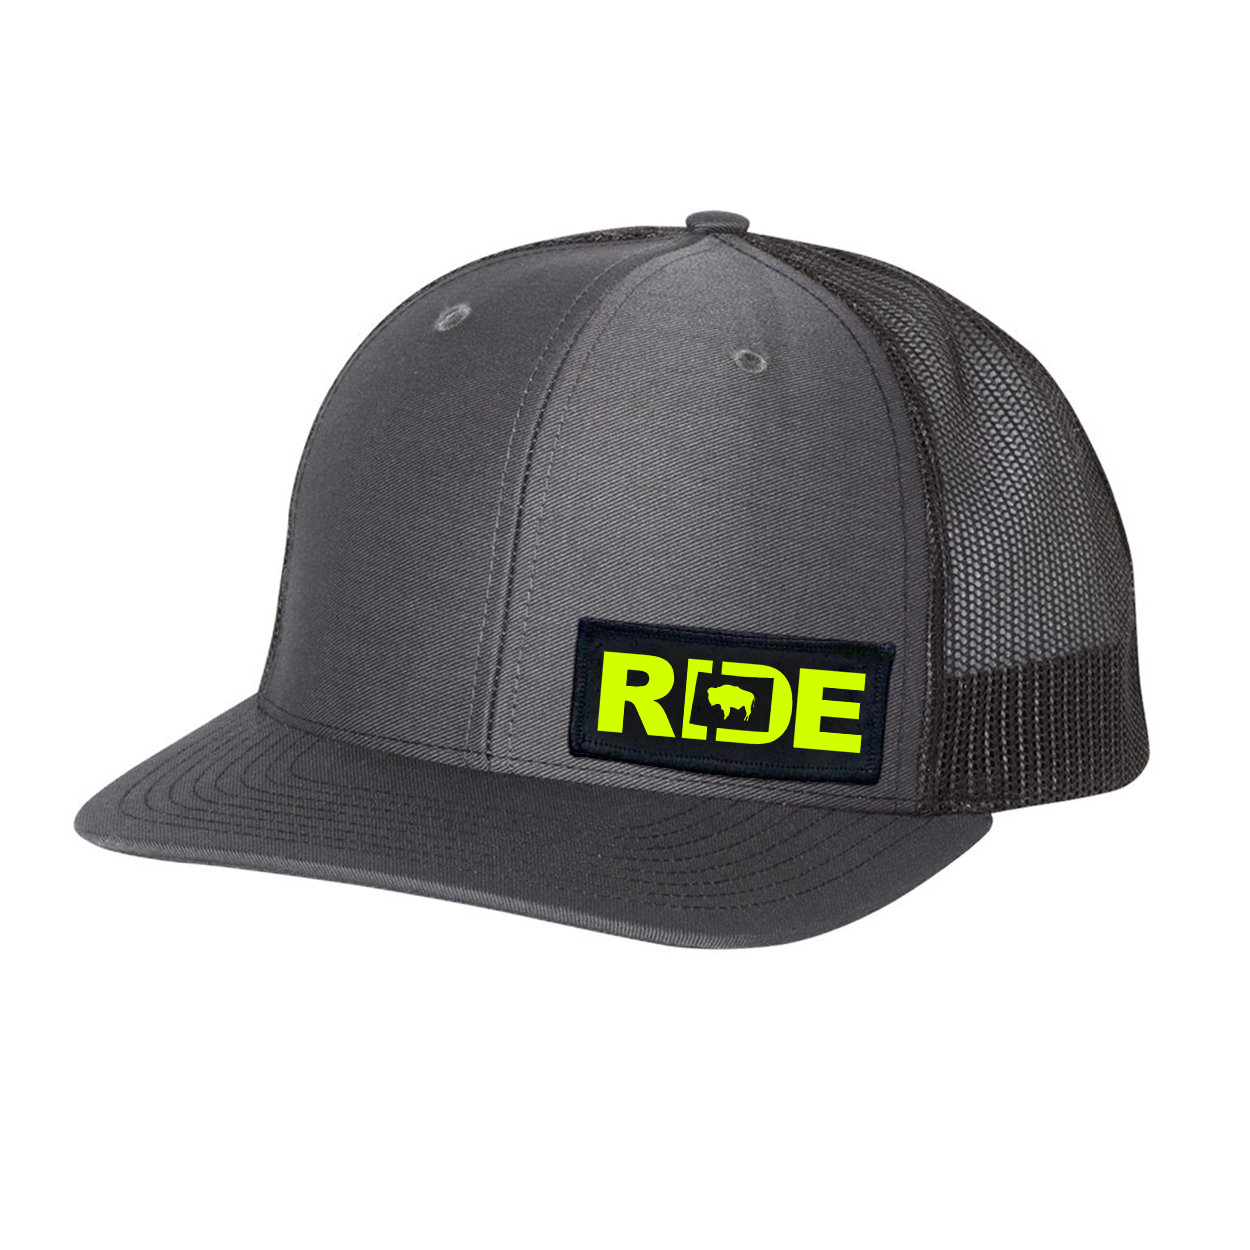 Ride Wyoming Night Out Woven Patch Flex-Fit Hat Dark Gray/Black (Hi-Vis Logo)